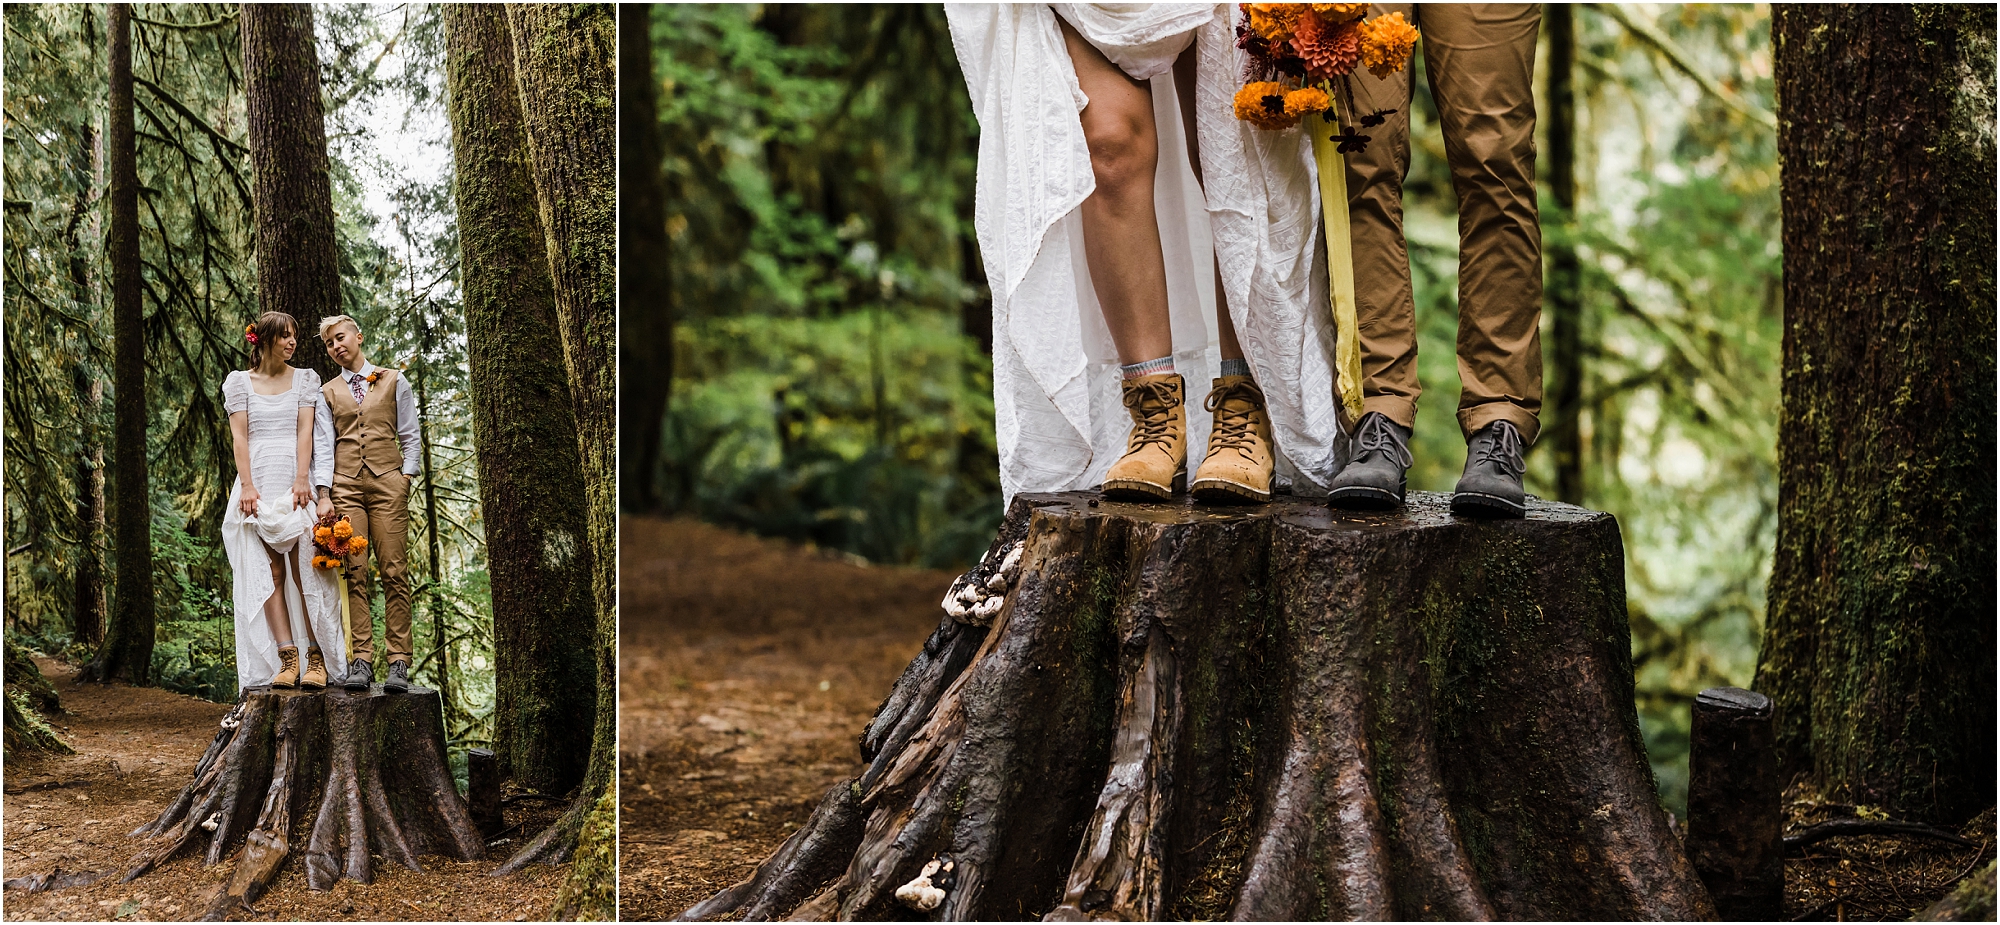 Hiking boots and a white wedding dress are perfect attire for your PNW hiking adventure elopement in Oregon. | Erica Swantek Photography